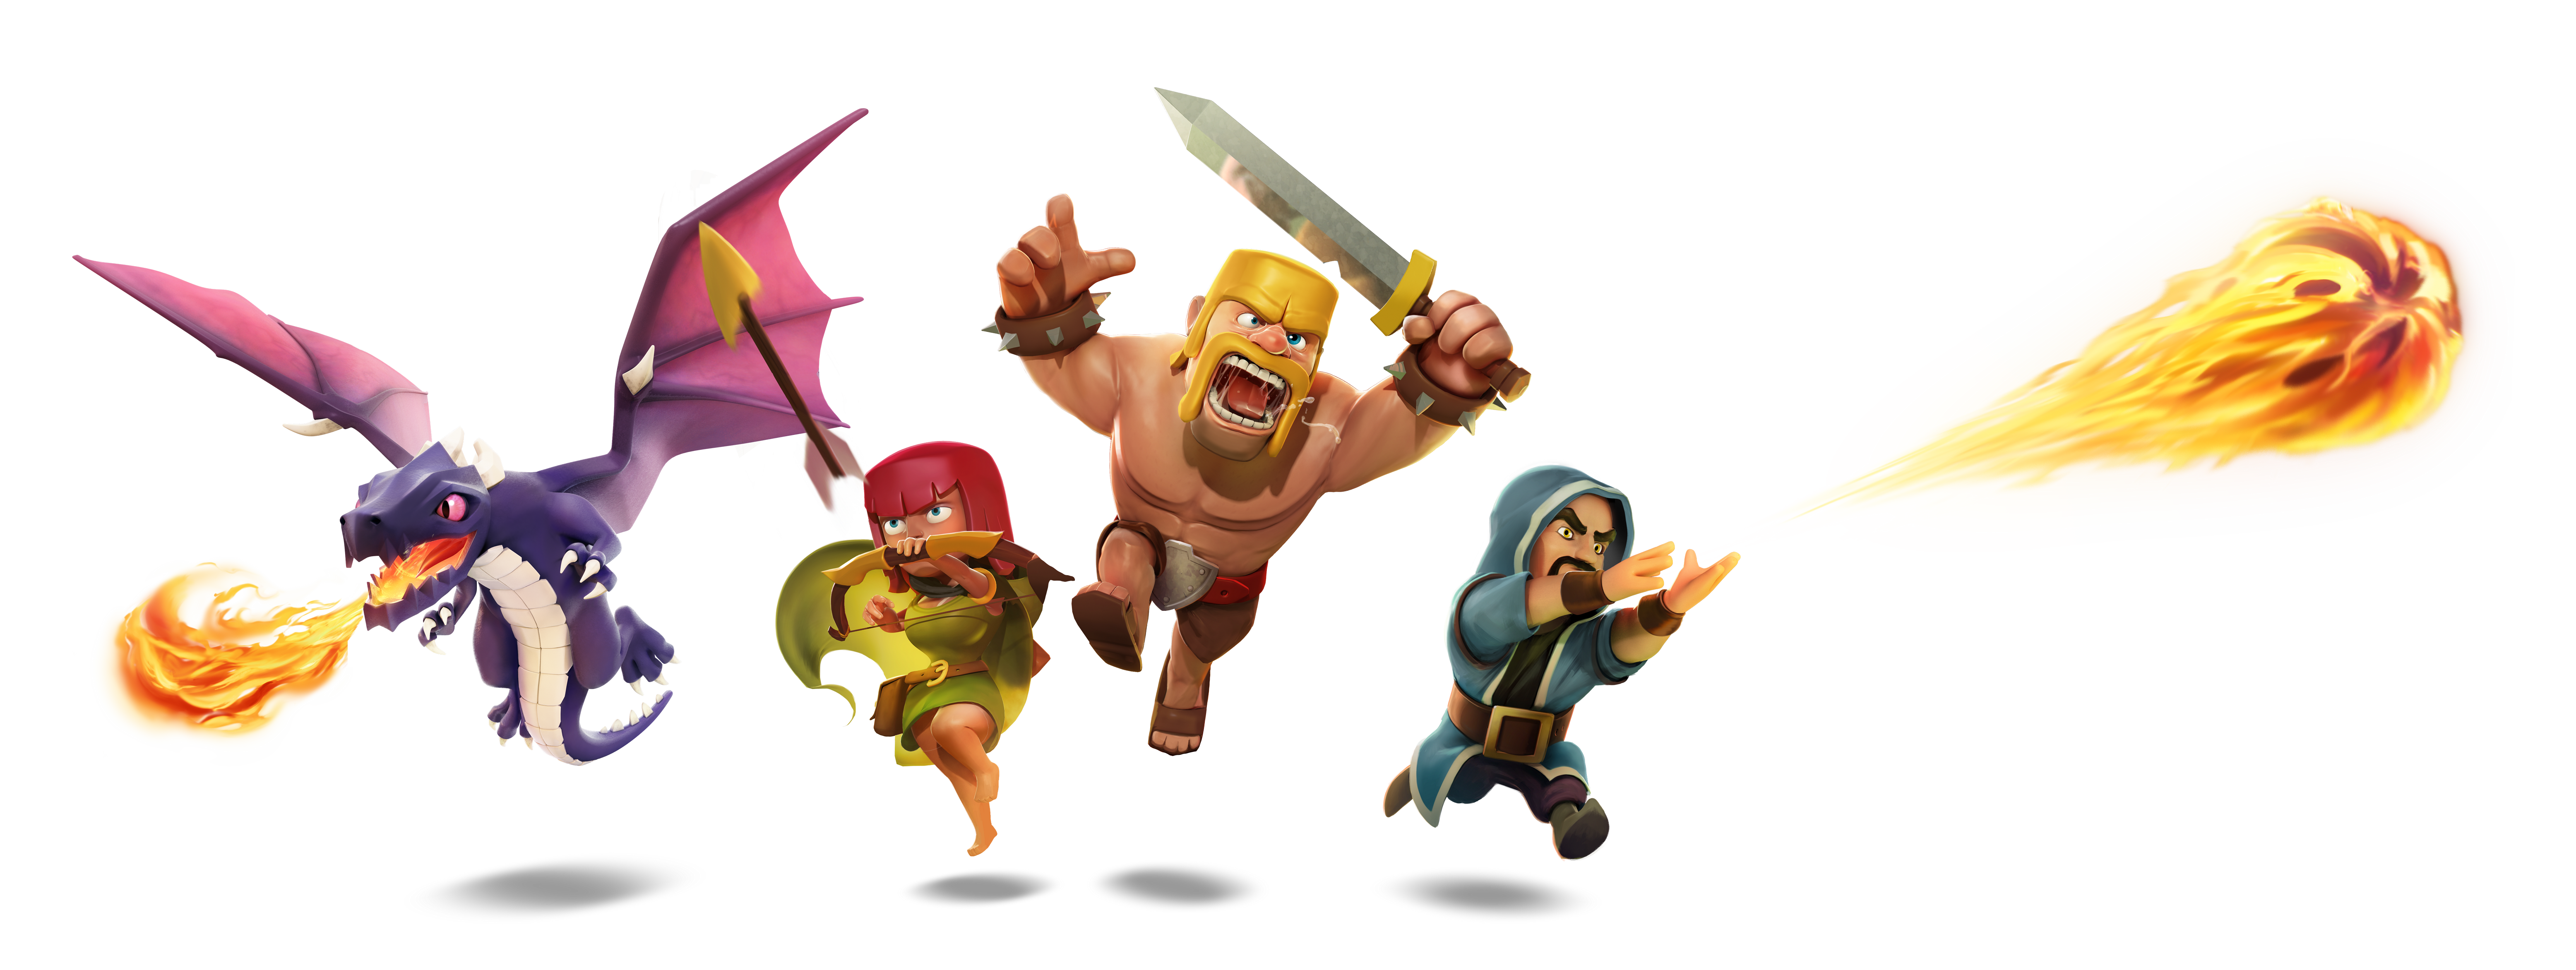 General 6224x2344 Clash of Clans video game characters transparent background dragon barbarian archer fireballs wizard ultrawide minimalism black background simple background sword bow and arrow